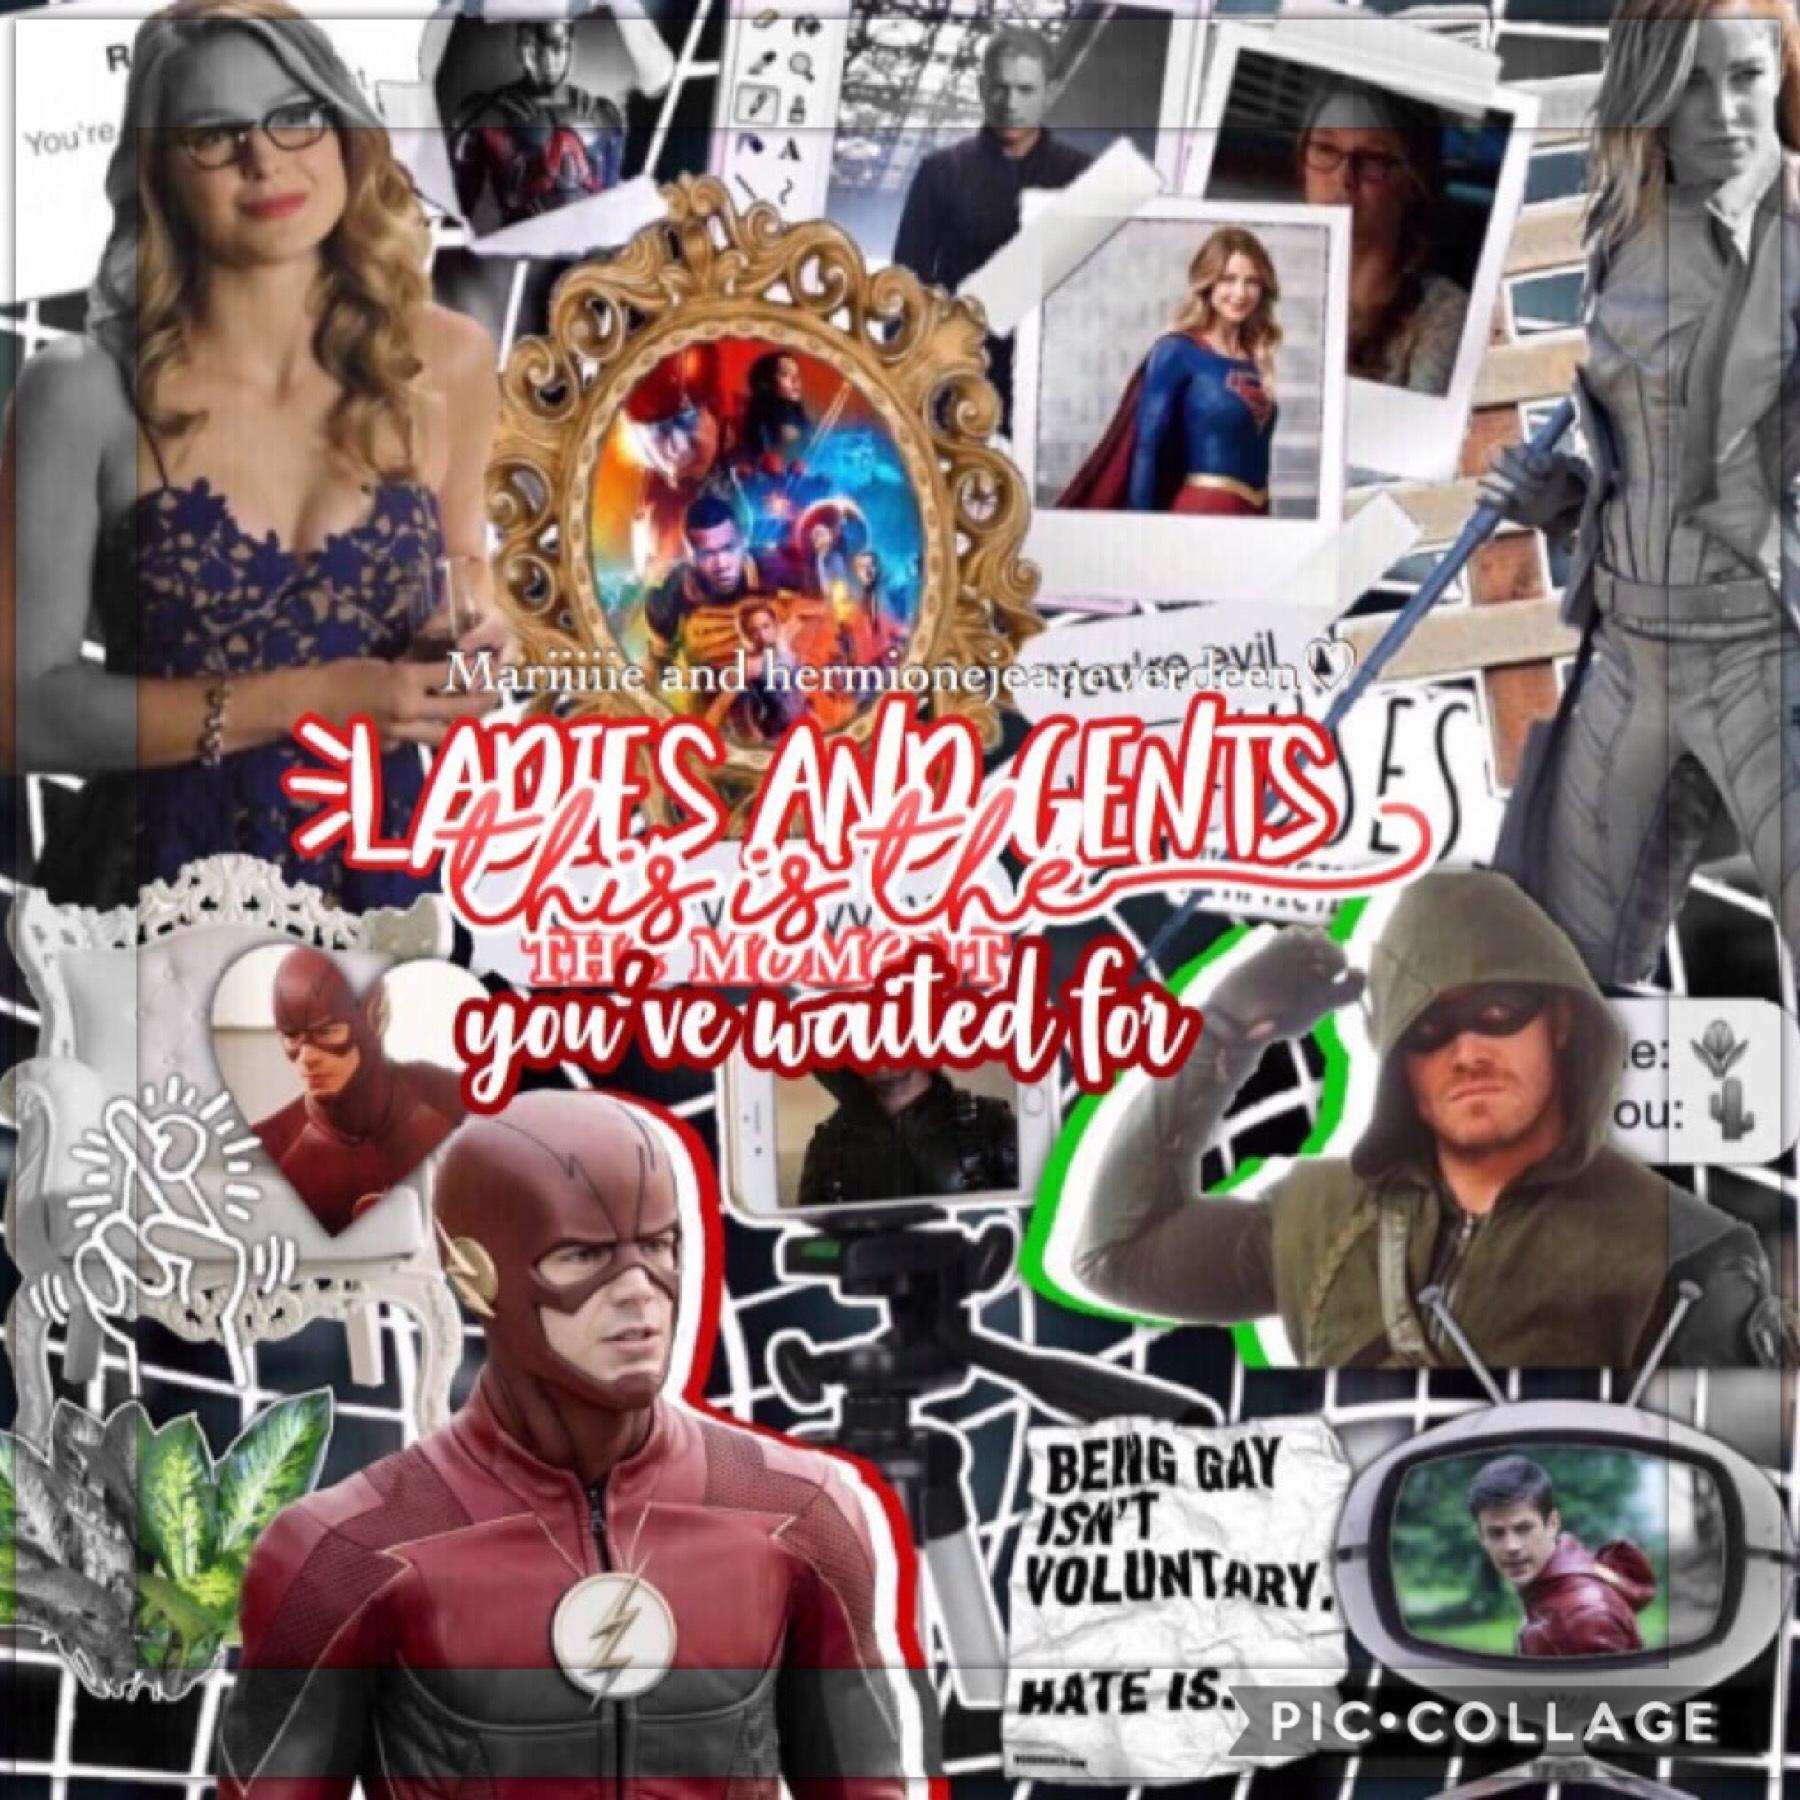 ❤️- T A P -❤️

Collab with hermionejeaneverdeen!💛 Go follow her if you are not already!😊
I did the bottom part with Barry and Oliver!

QOTD - Fav tv show from the arrowverse?

AOTD - Love them but I really love The Flash!❤️

